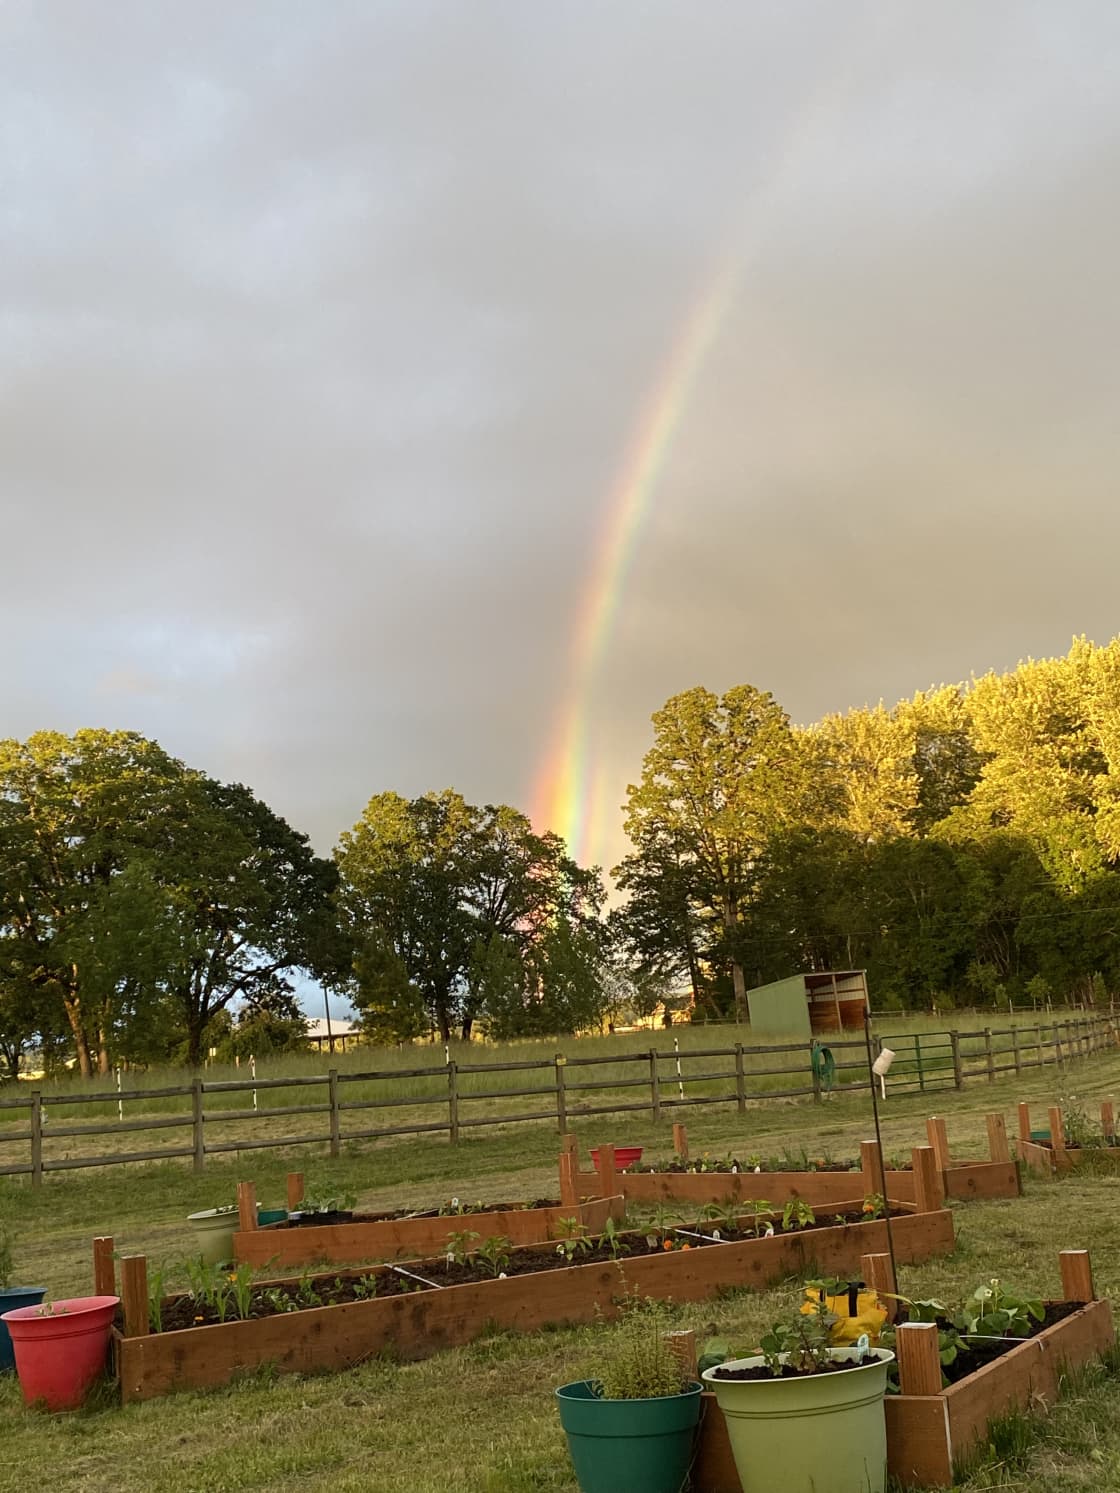 One of the amazing rainbows we’ve been lucky enough to capture 🌈 

For more photos and info of our farm, and check out our next  Glamper listing :)